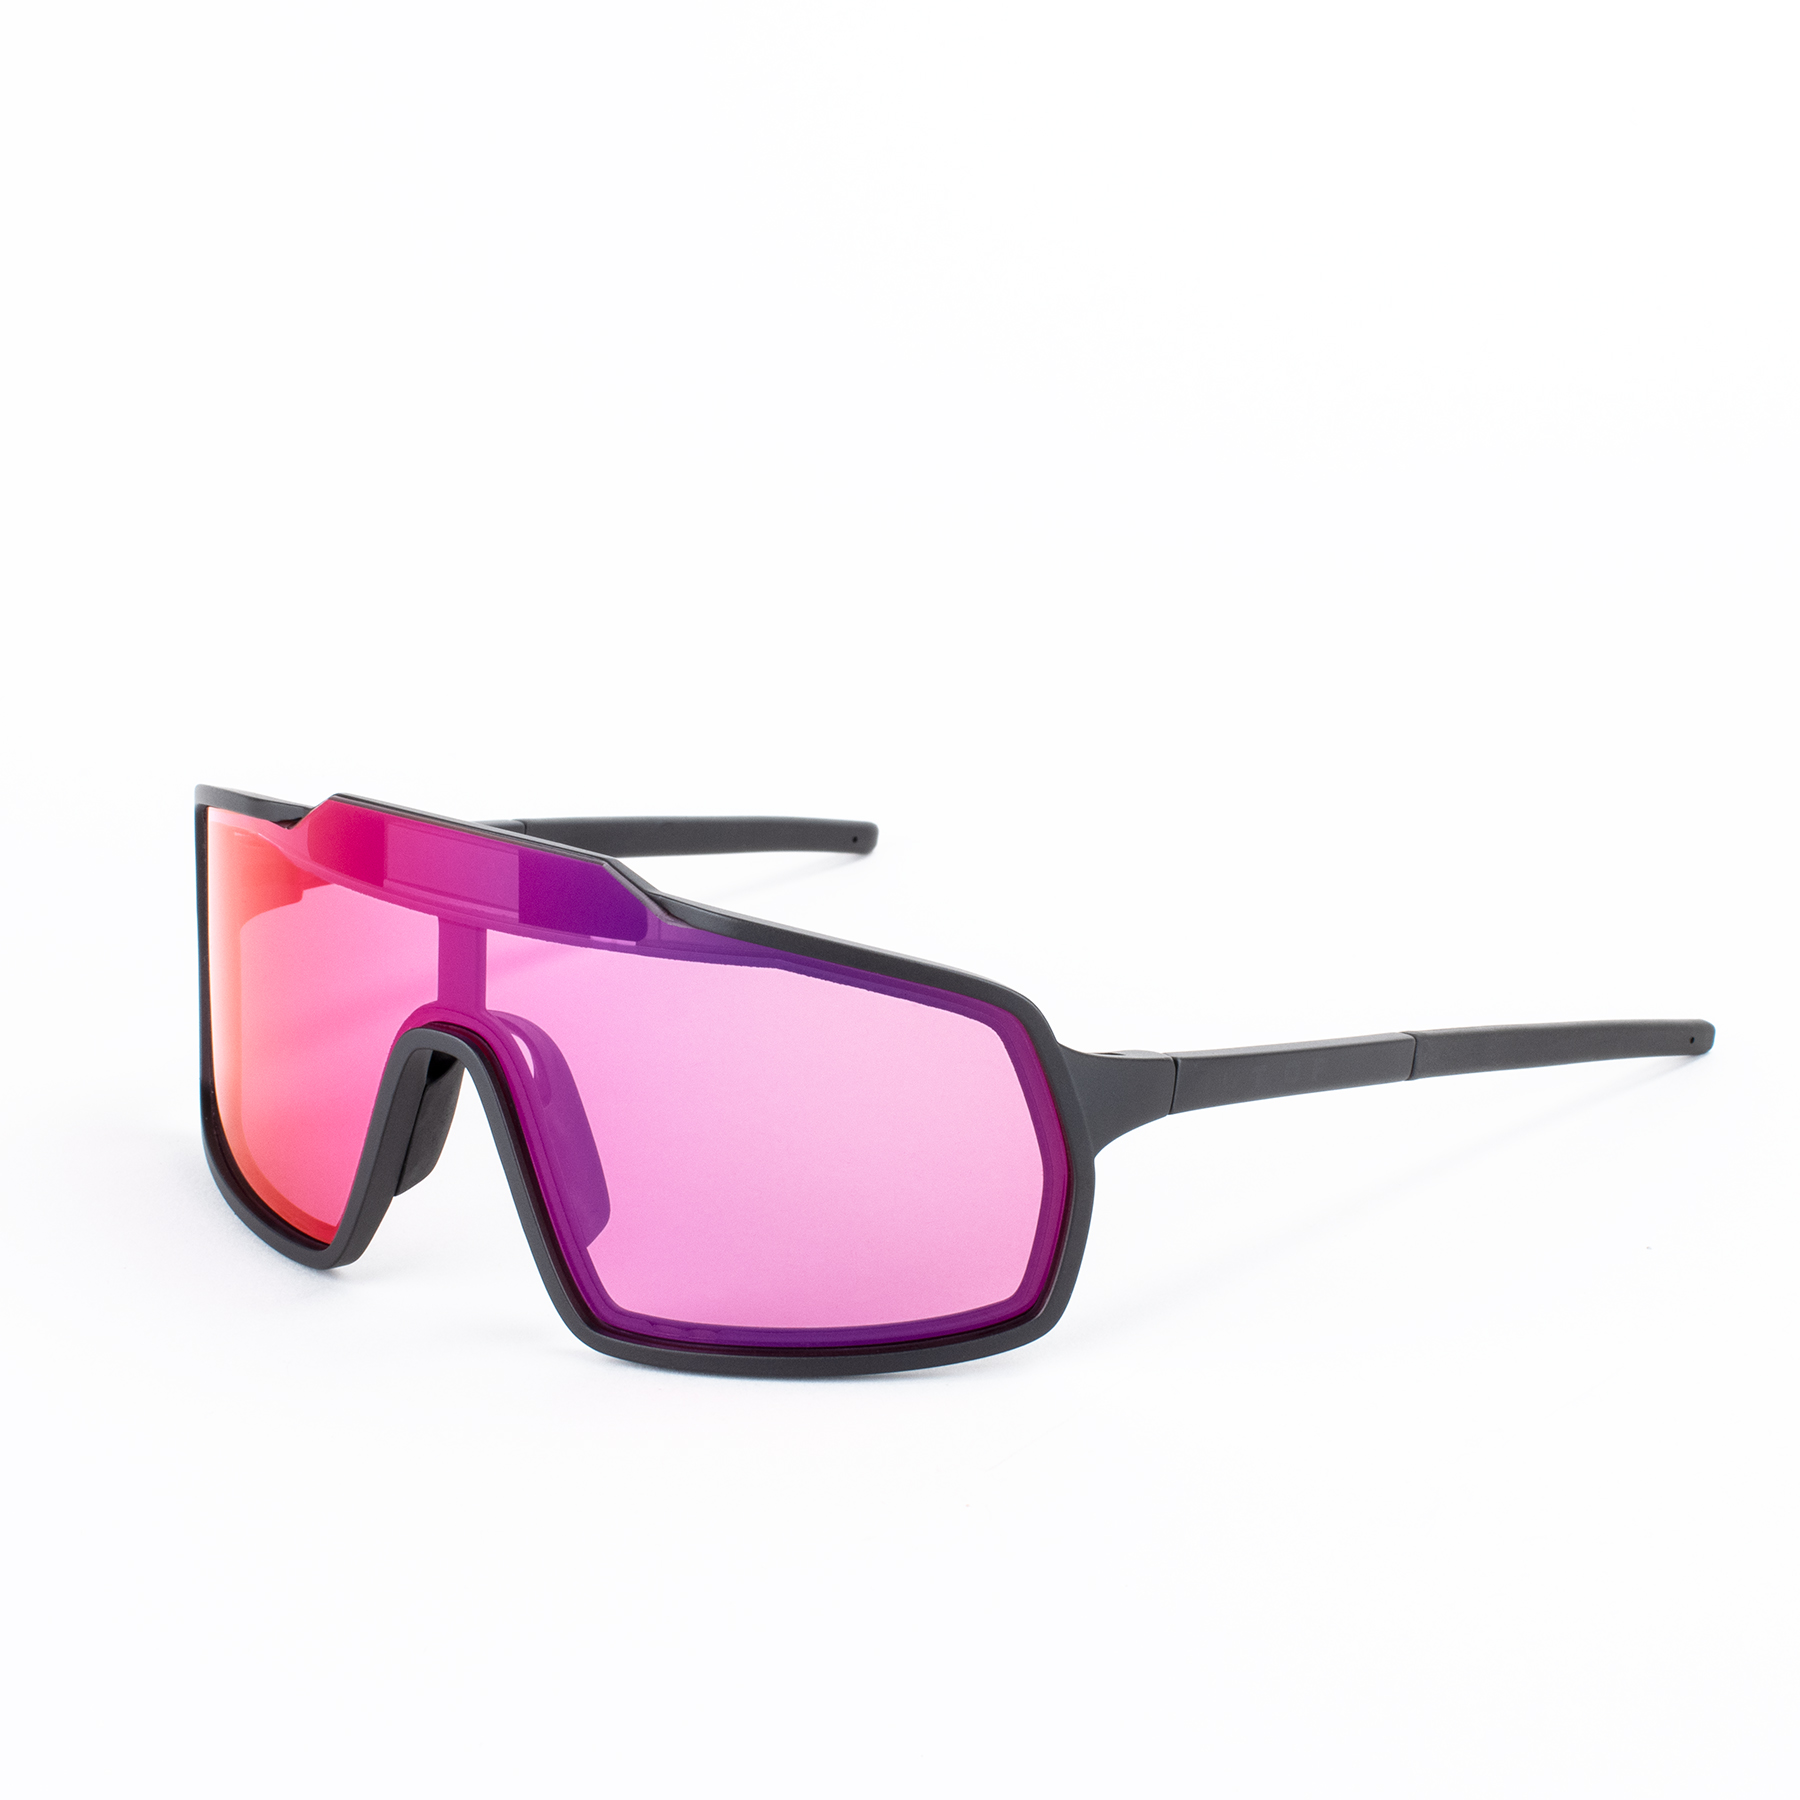 Bot 2 adapta electronic sunglasses with IRID red lens